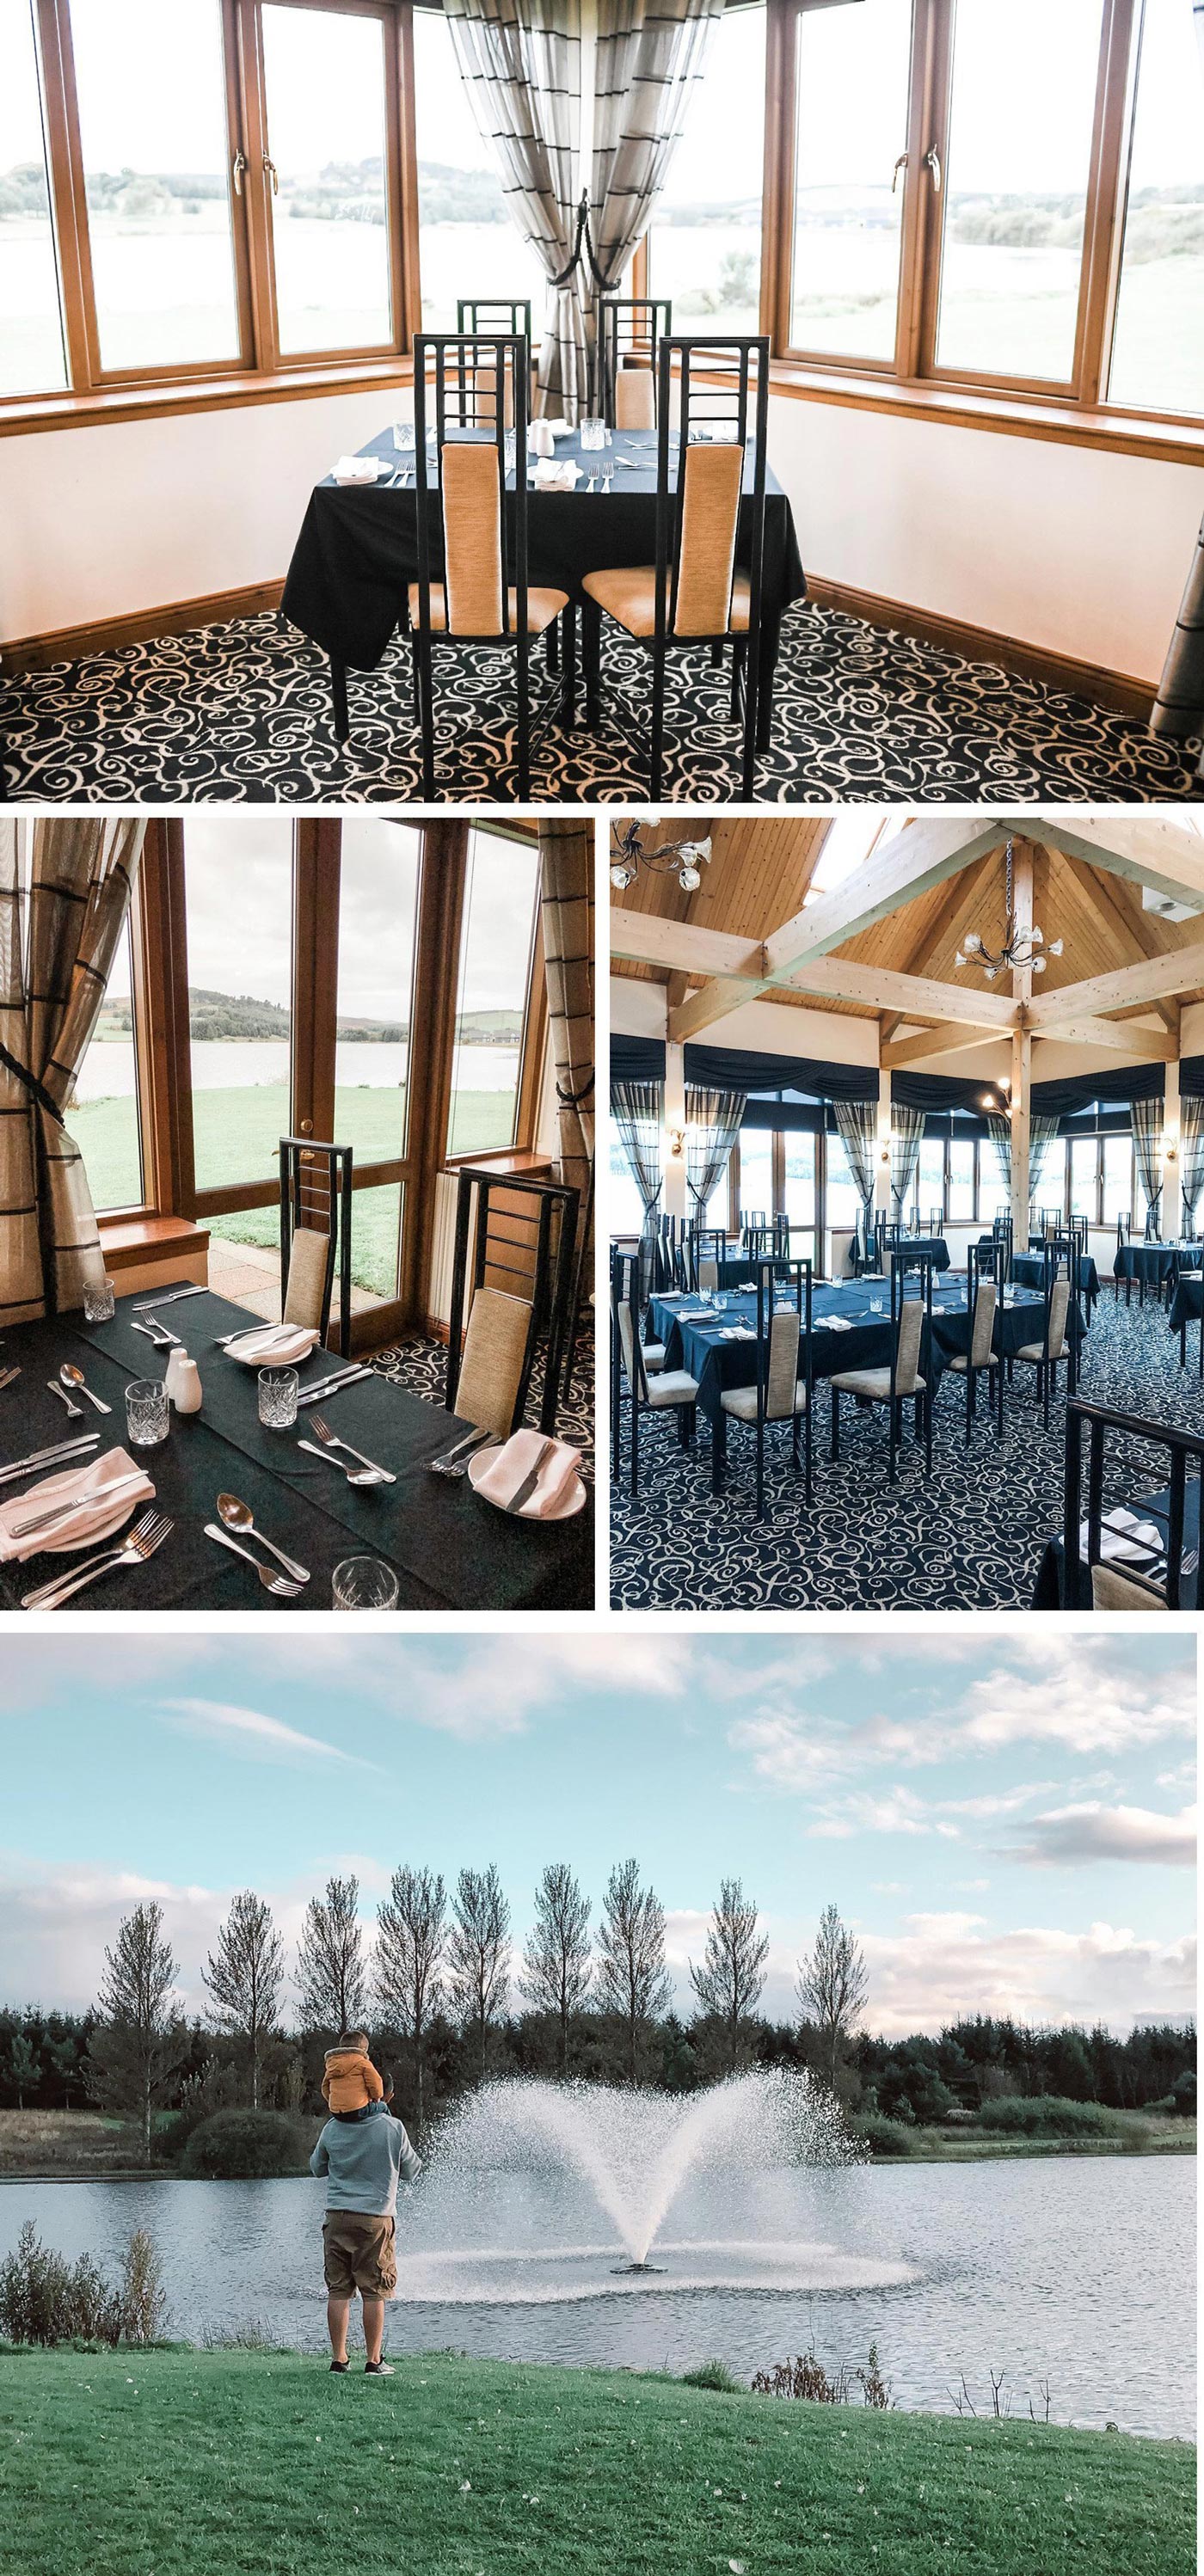 The Room With a View Restaurant at Landal Piperdam, near Dundee